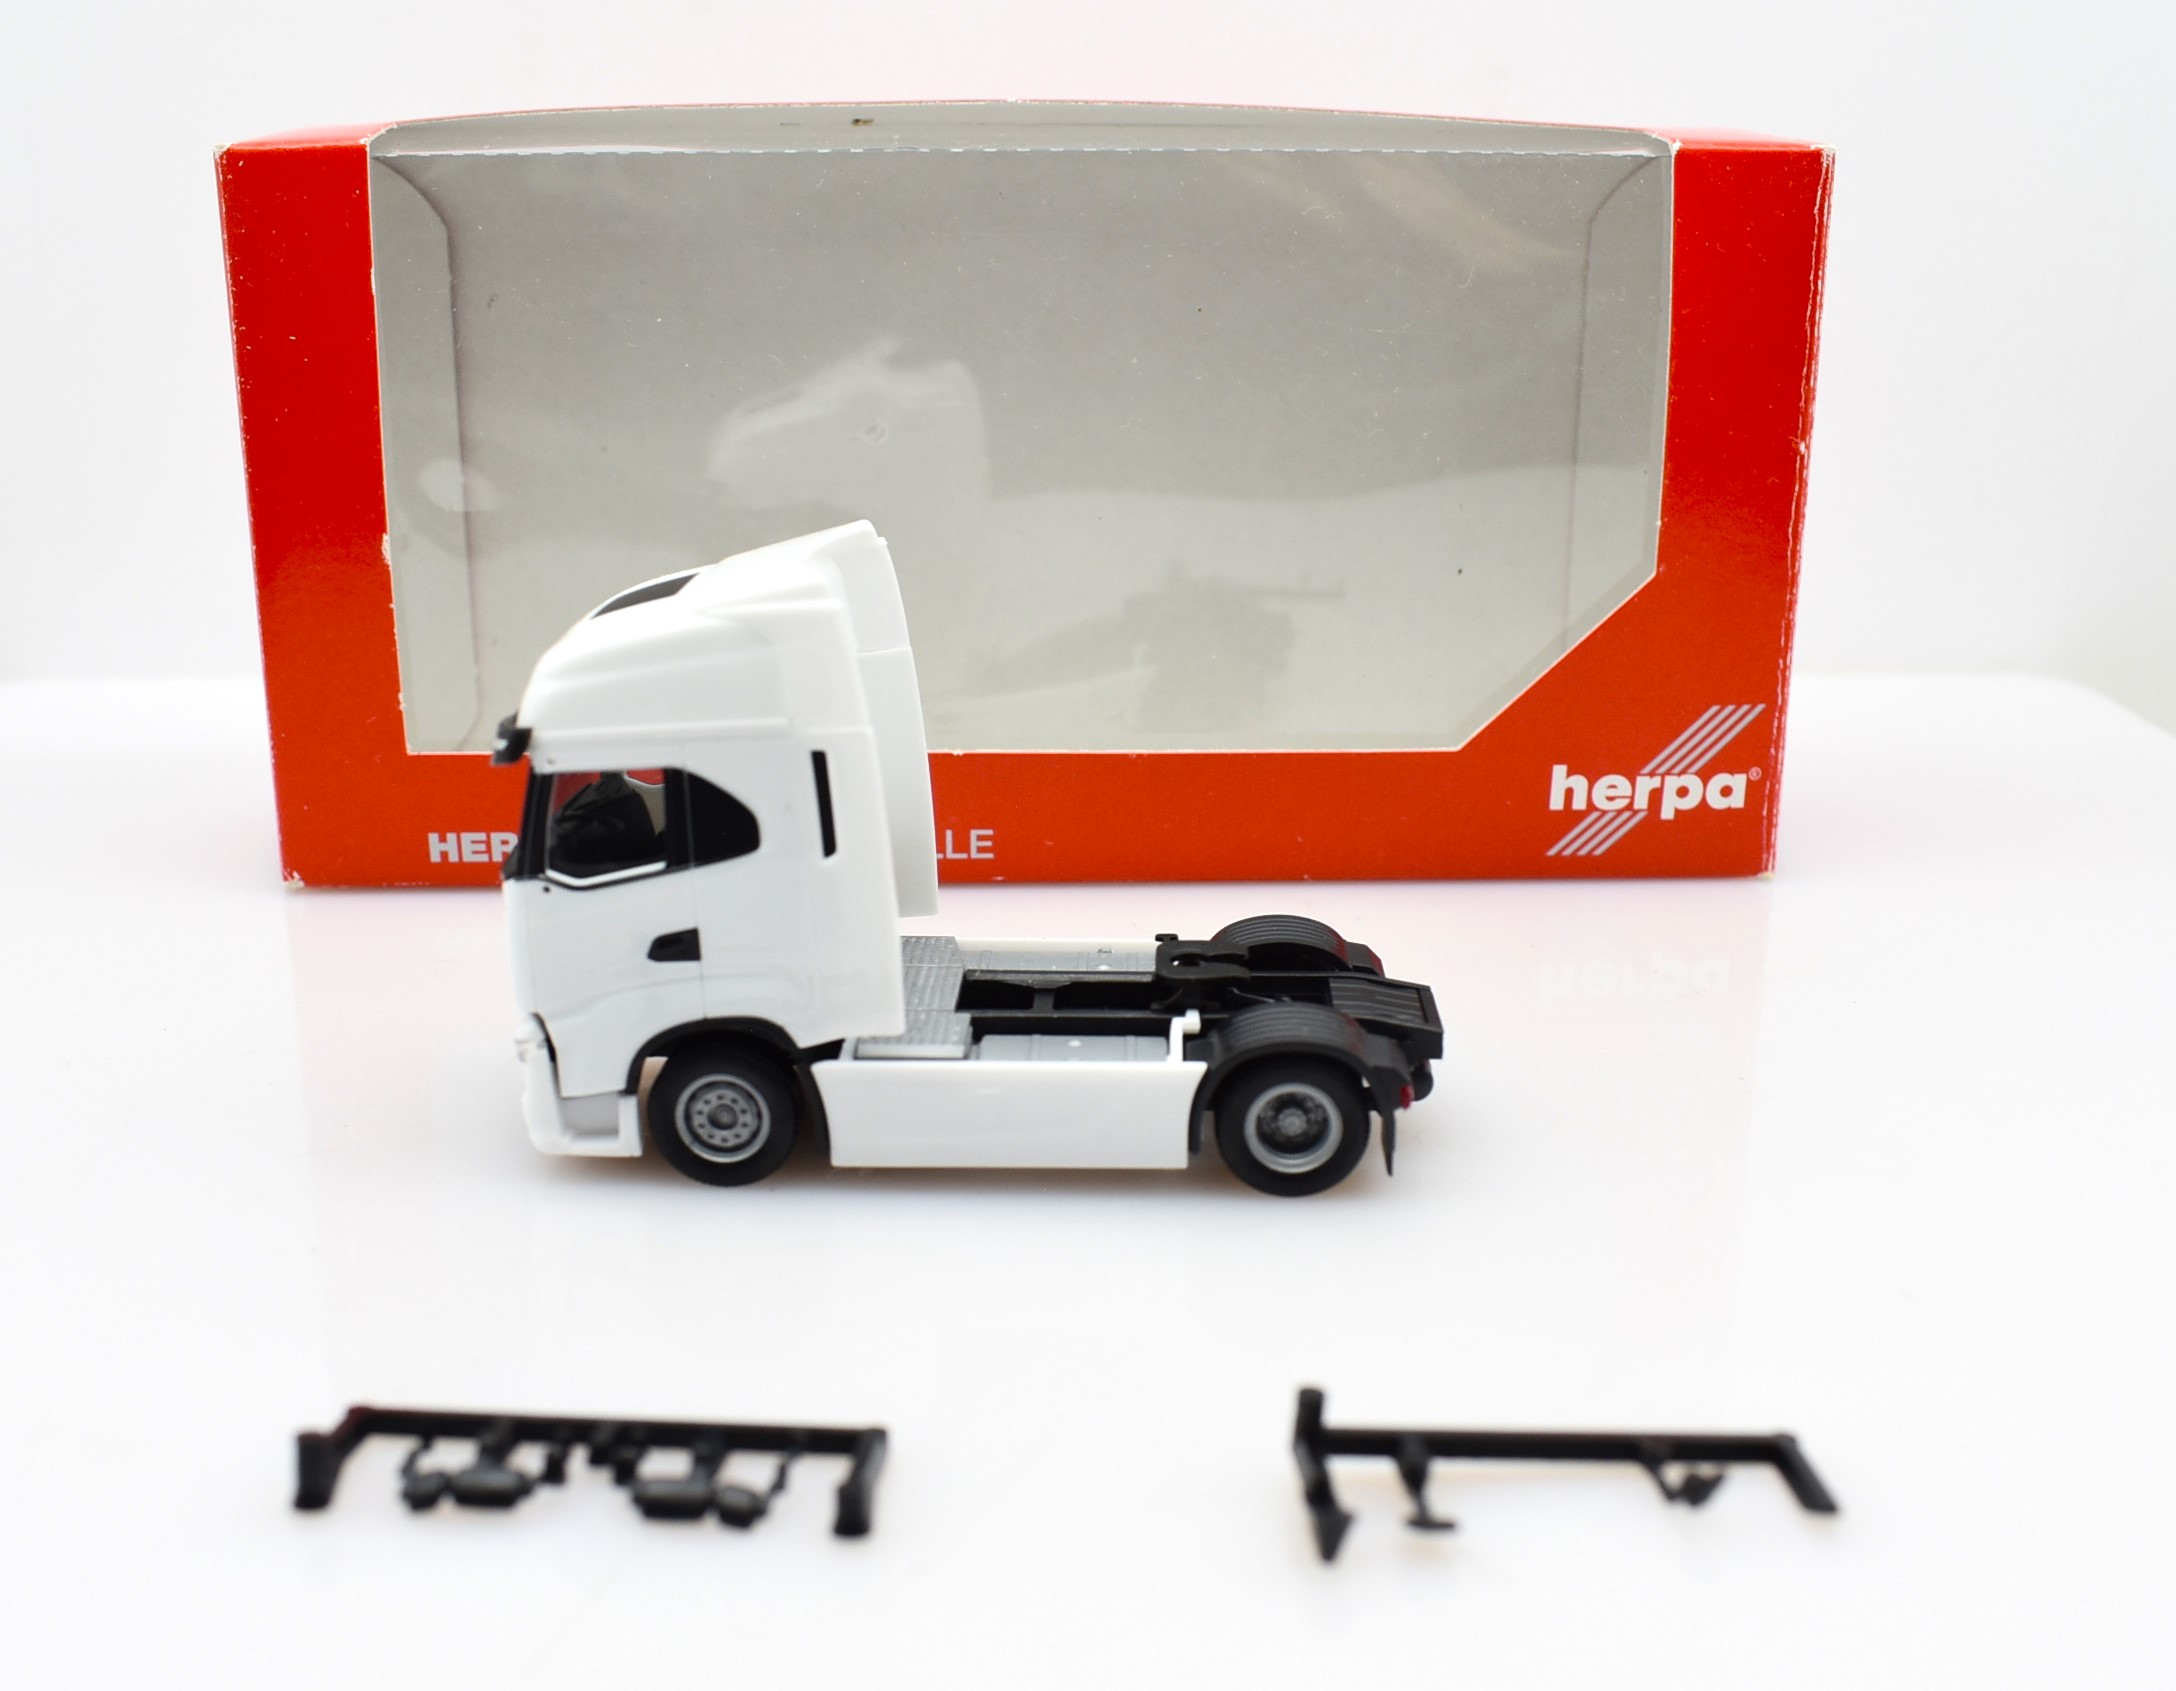 herpa model truck 1:87 scale Iveco Stralis XP vehiclesroadcollection